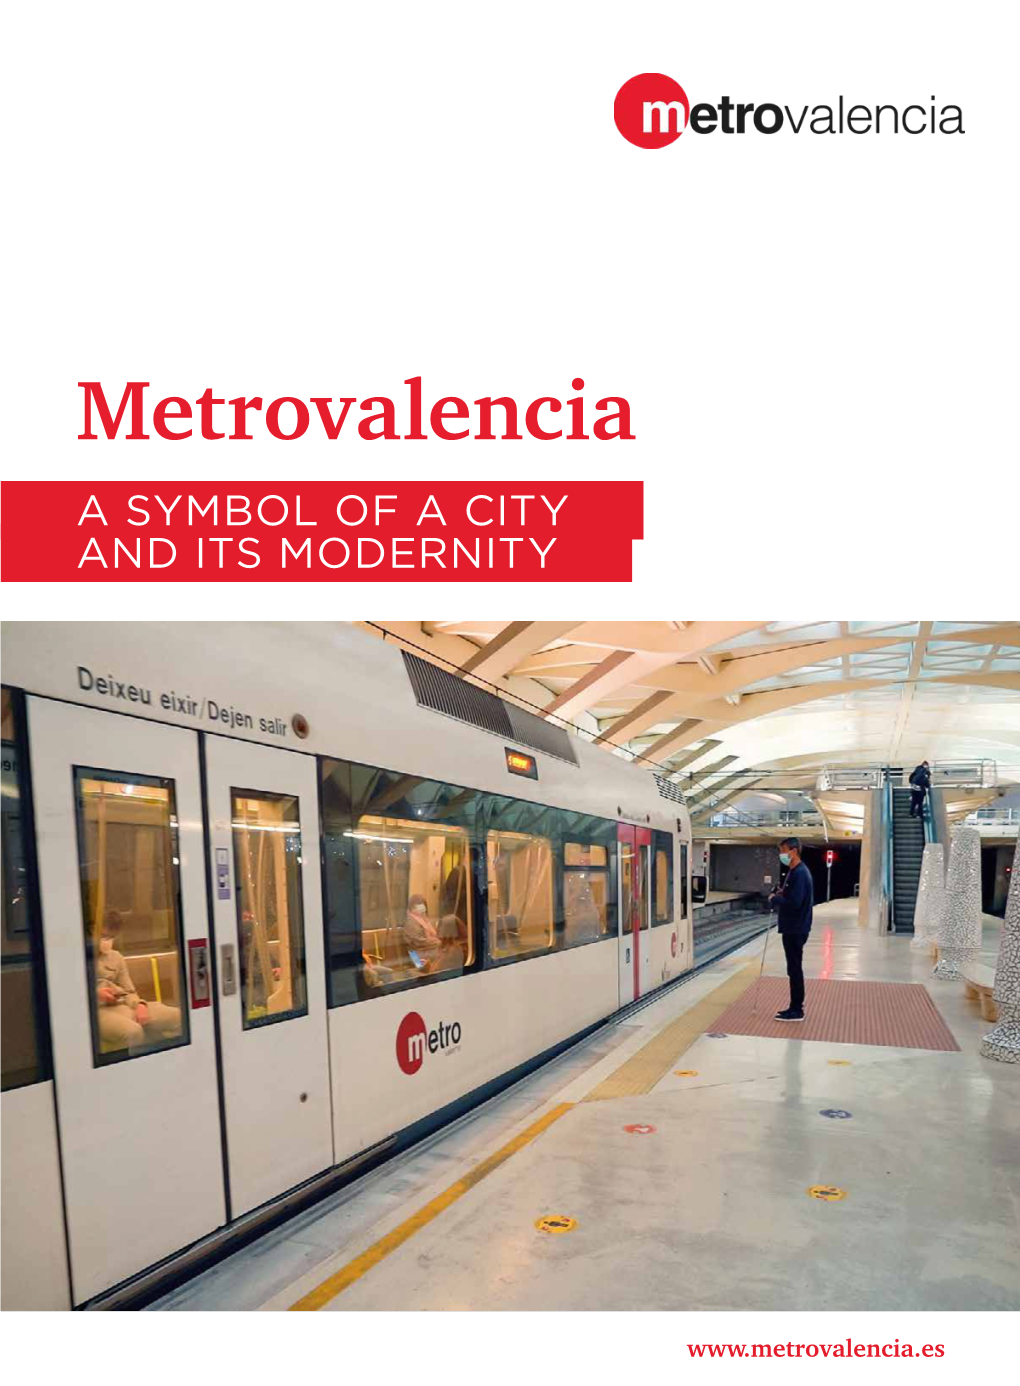 Metrovalencia a SYMBOL of a CITY and ITS MODERNITY